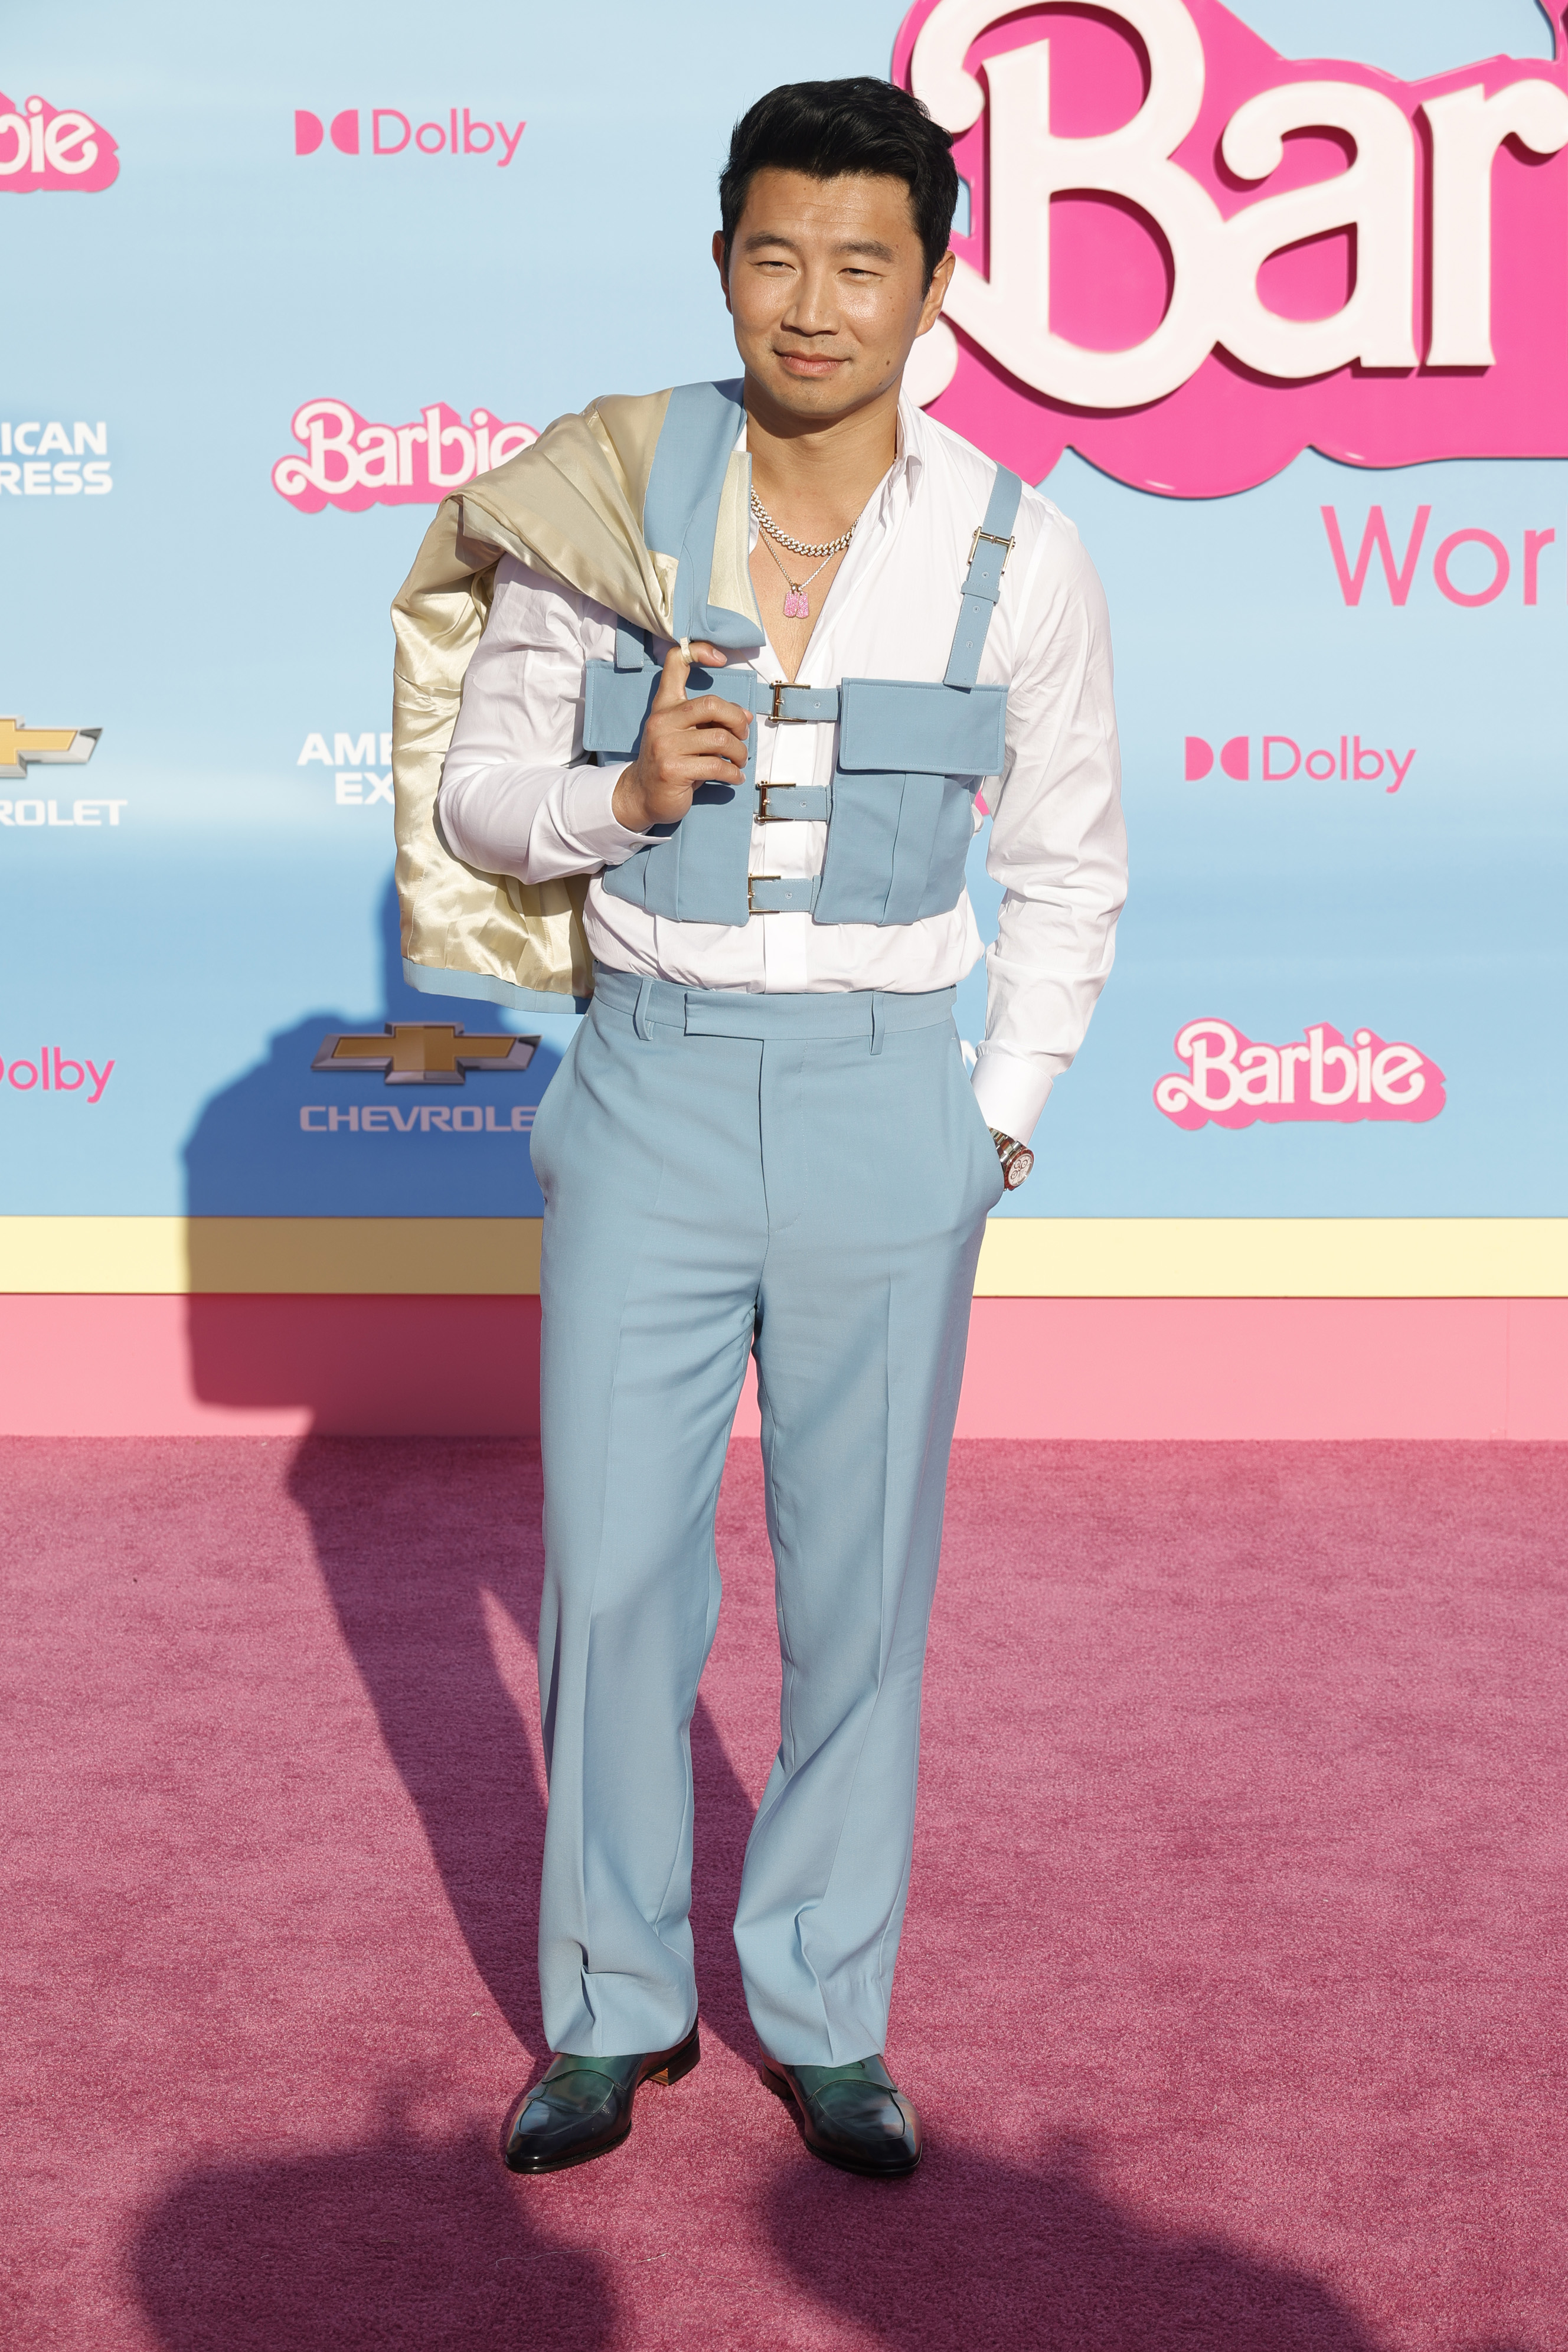 In a light blue suspender vest and matching pants, with a lighter jacket and shirt